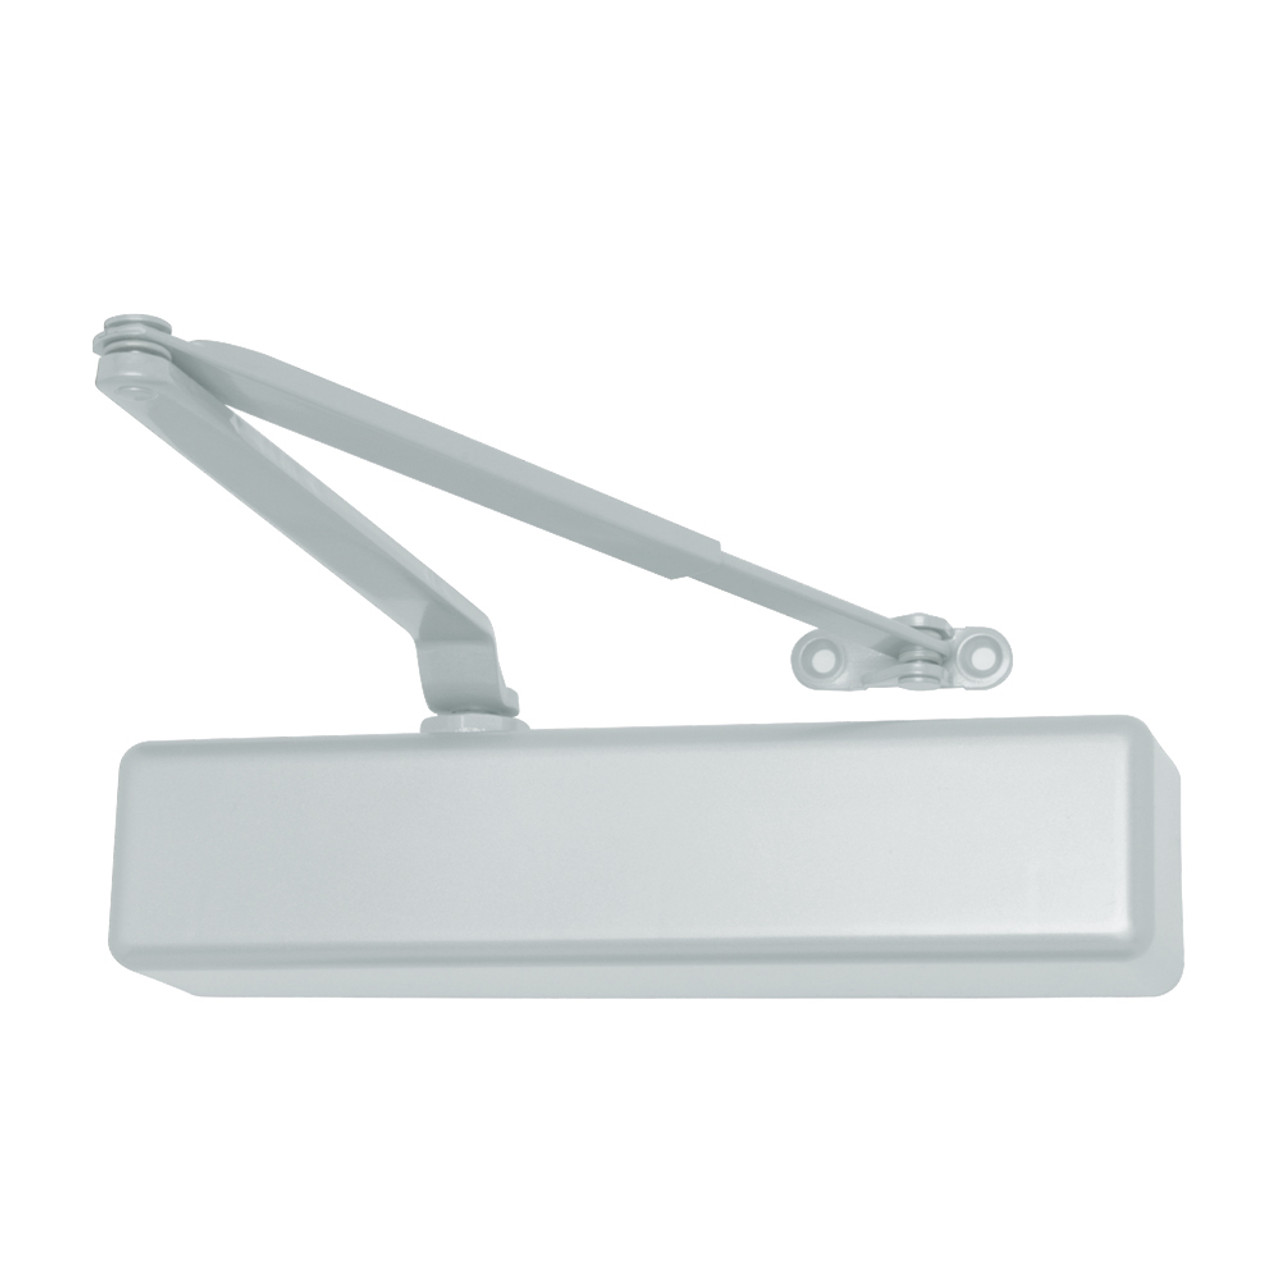 1461-HLONG-US26 LCN Door Closer with Hold Open Long Arm in Bright Chrome Finish